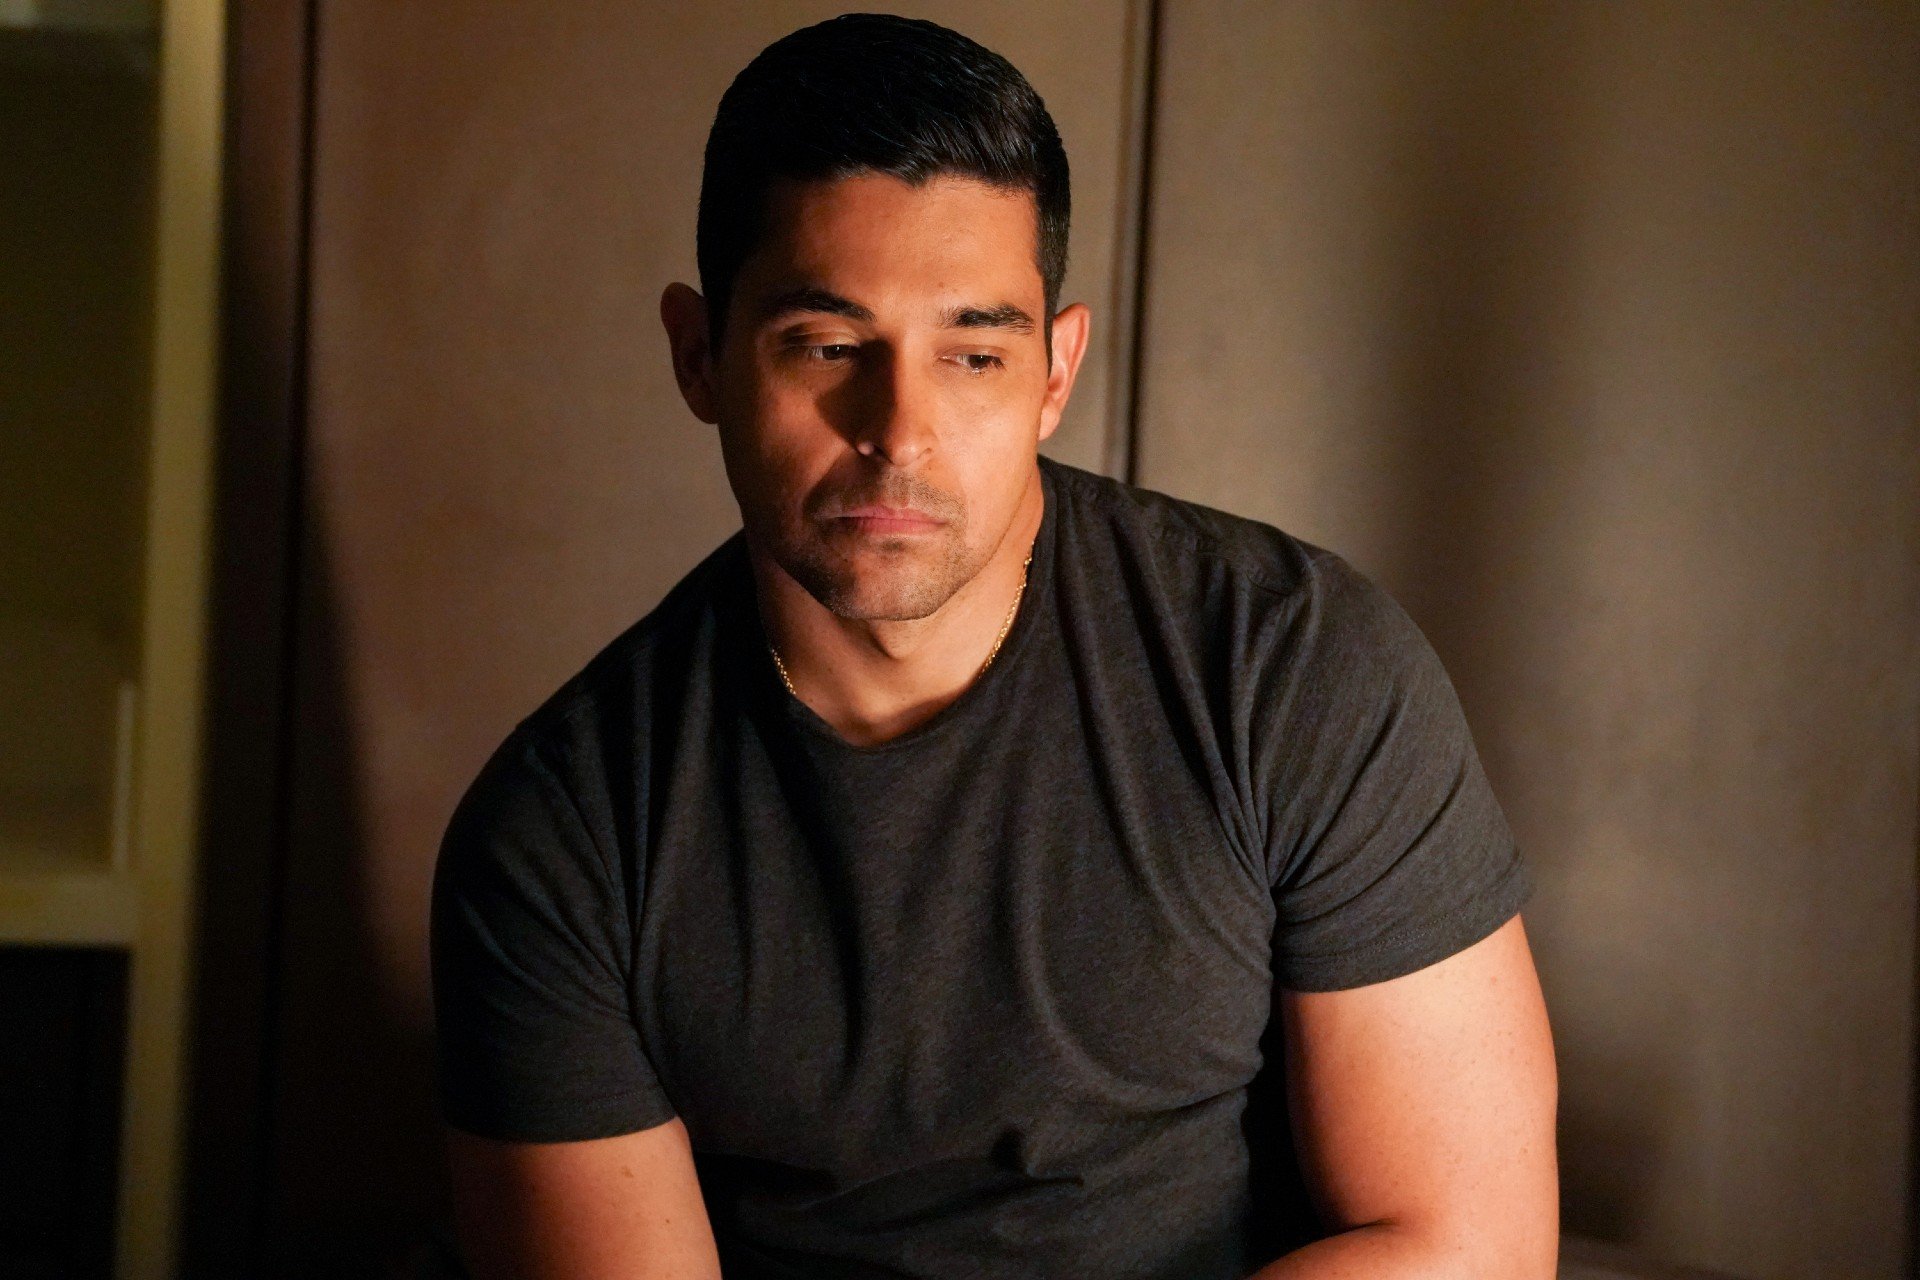 ‘NCIS’ Nick Torres Faces Dark Past and Vows to Get Himself ‘Right’